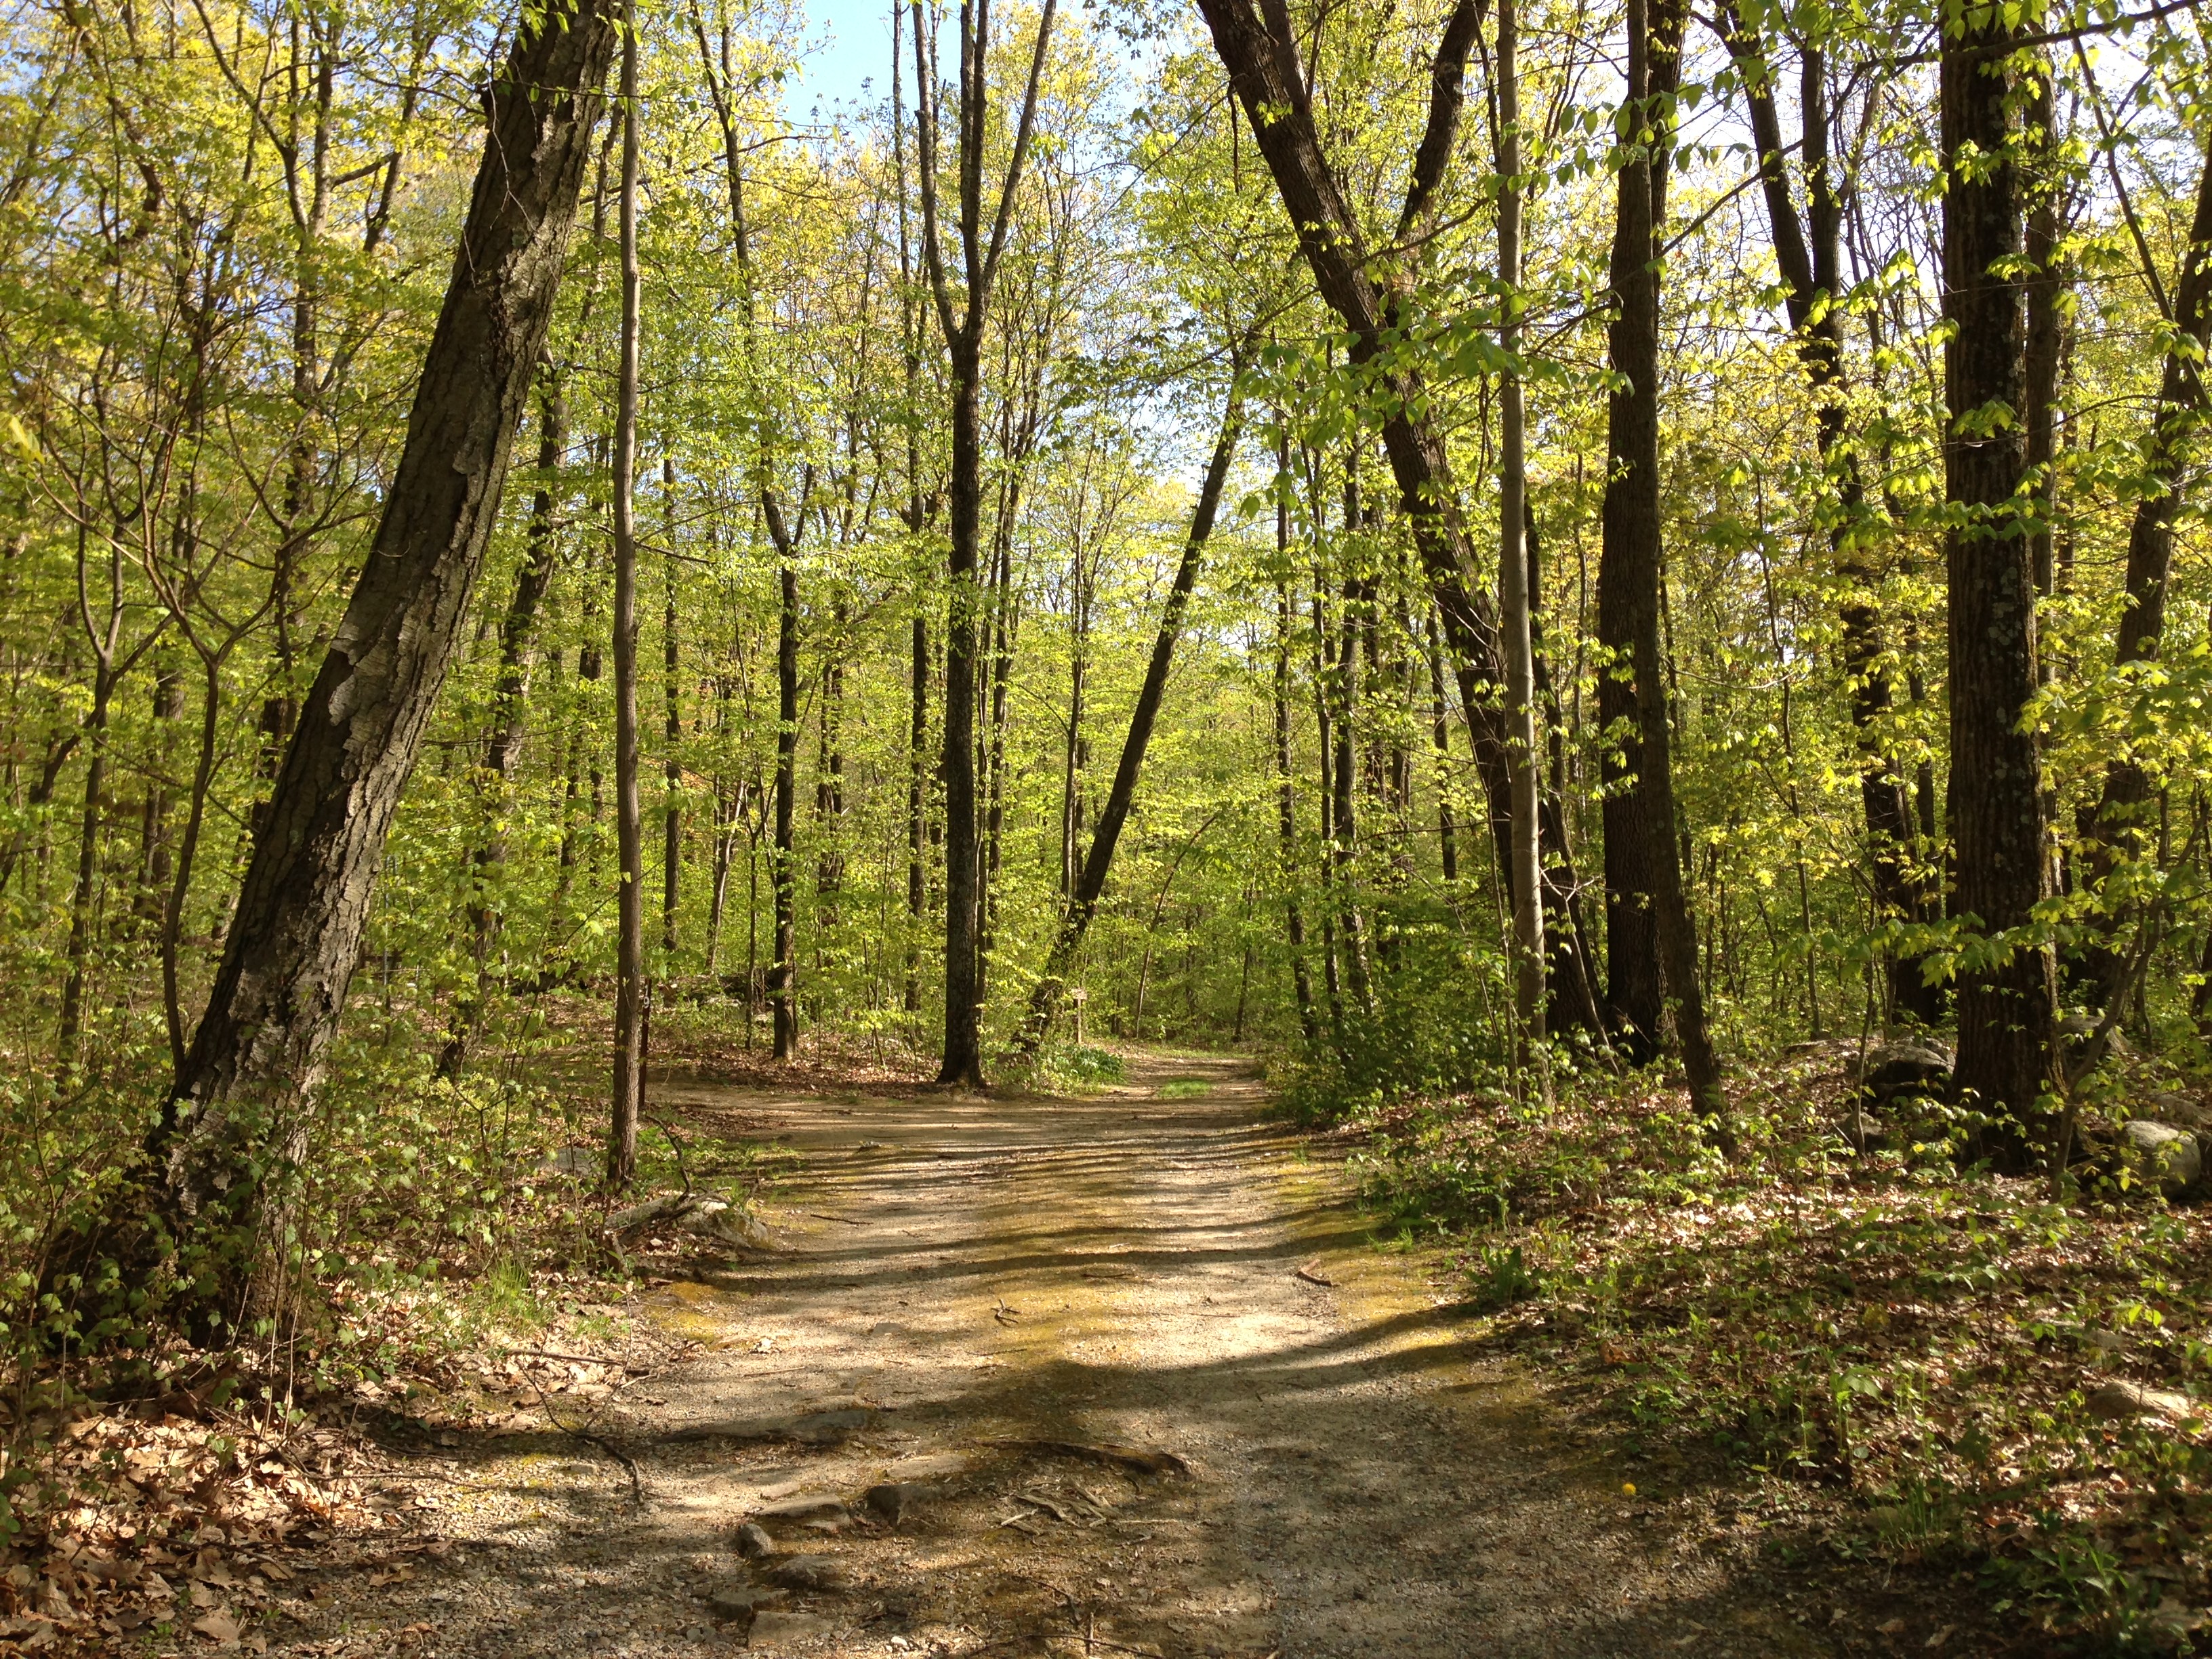 File:2013-05-06 16 33 15 View along a dirt road to a camp site in ...